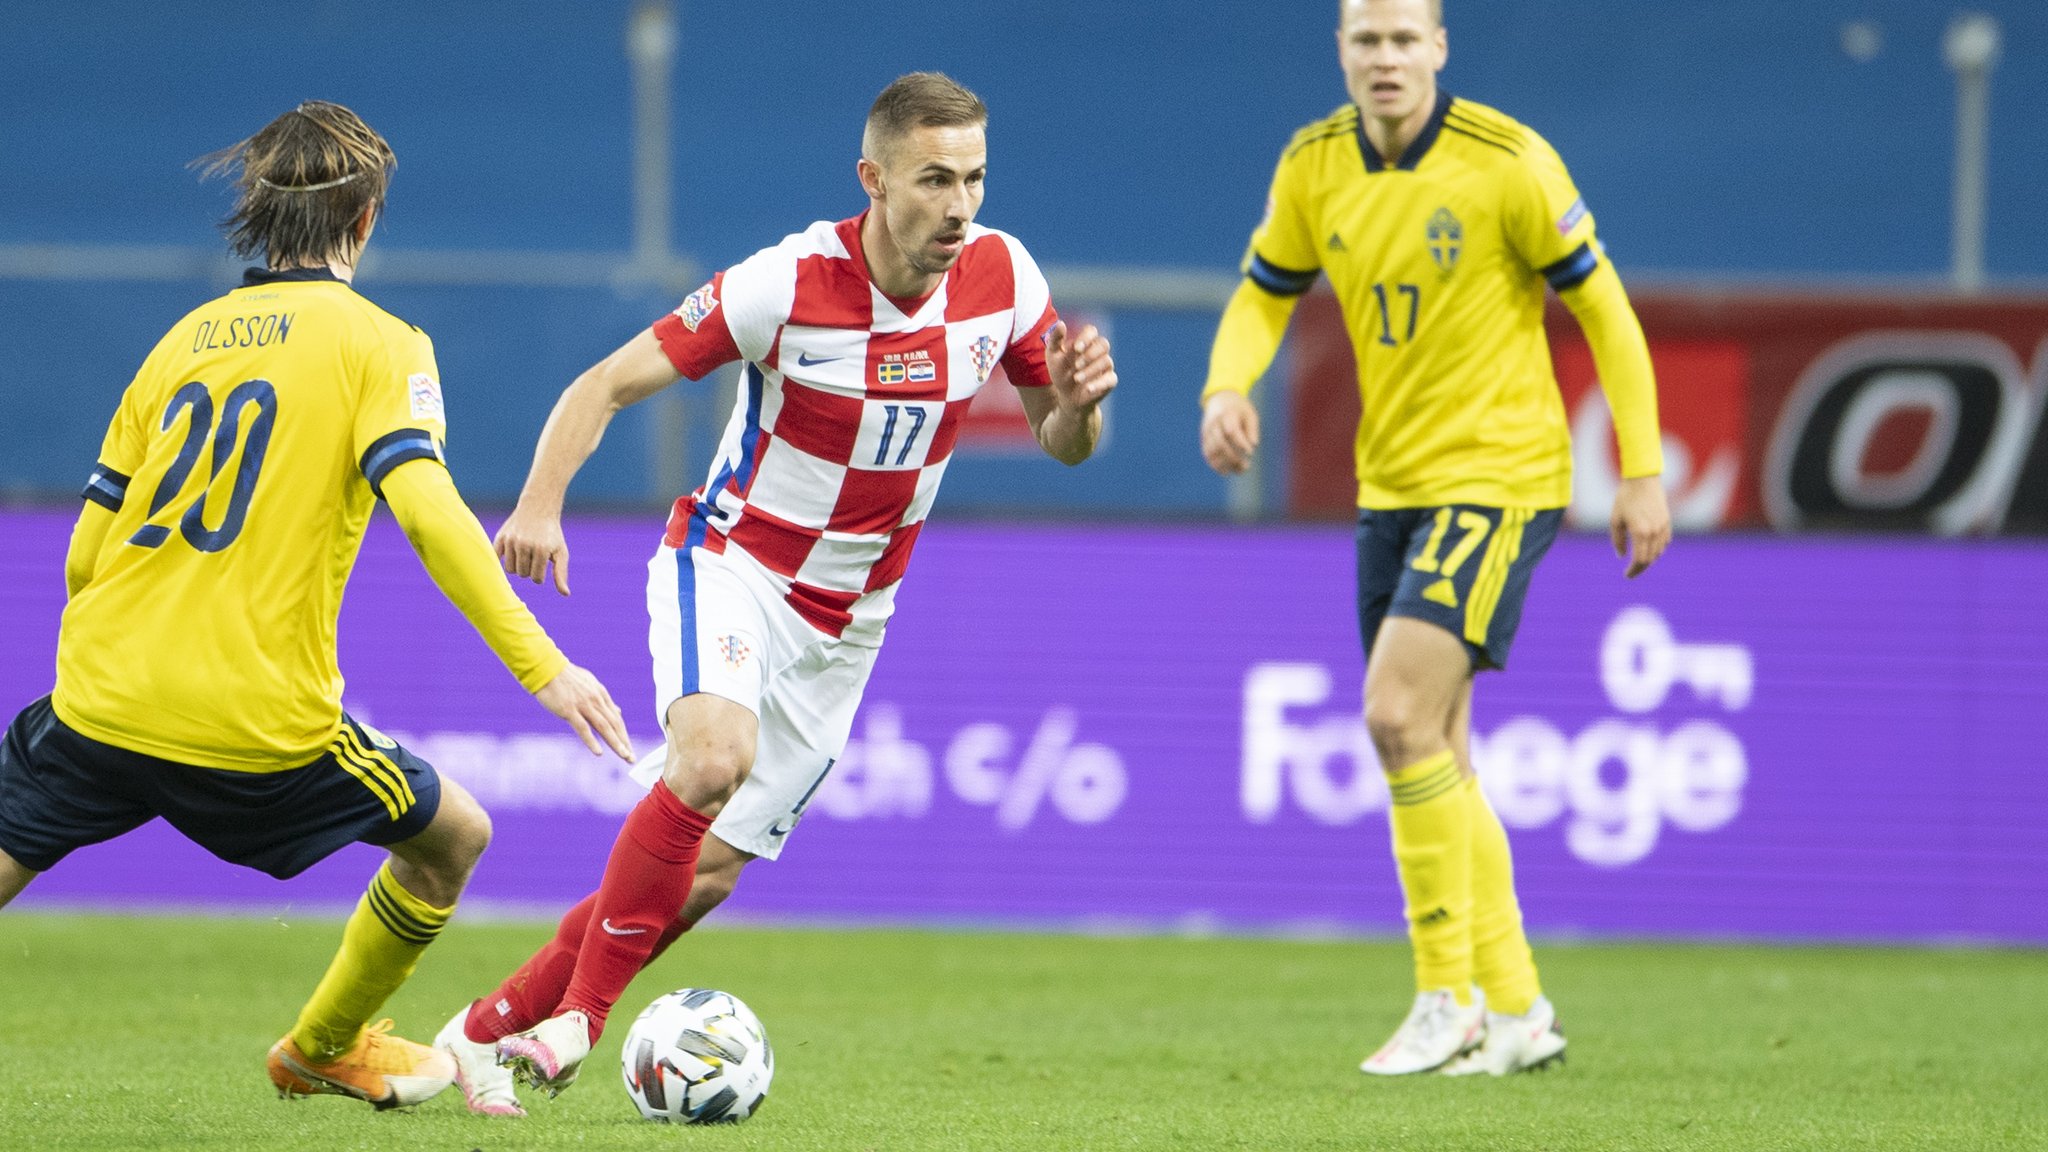 HNS on Twitter: "🇭🇷 #Croatia international Marko Rog of @CagliariCalcio has suffered an ACL injury and awaits surgery. Marko, get well soon! 👊 #Family #Vatreni🔥… https://t.co/XhieGzbt4t"